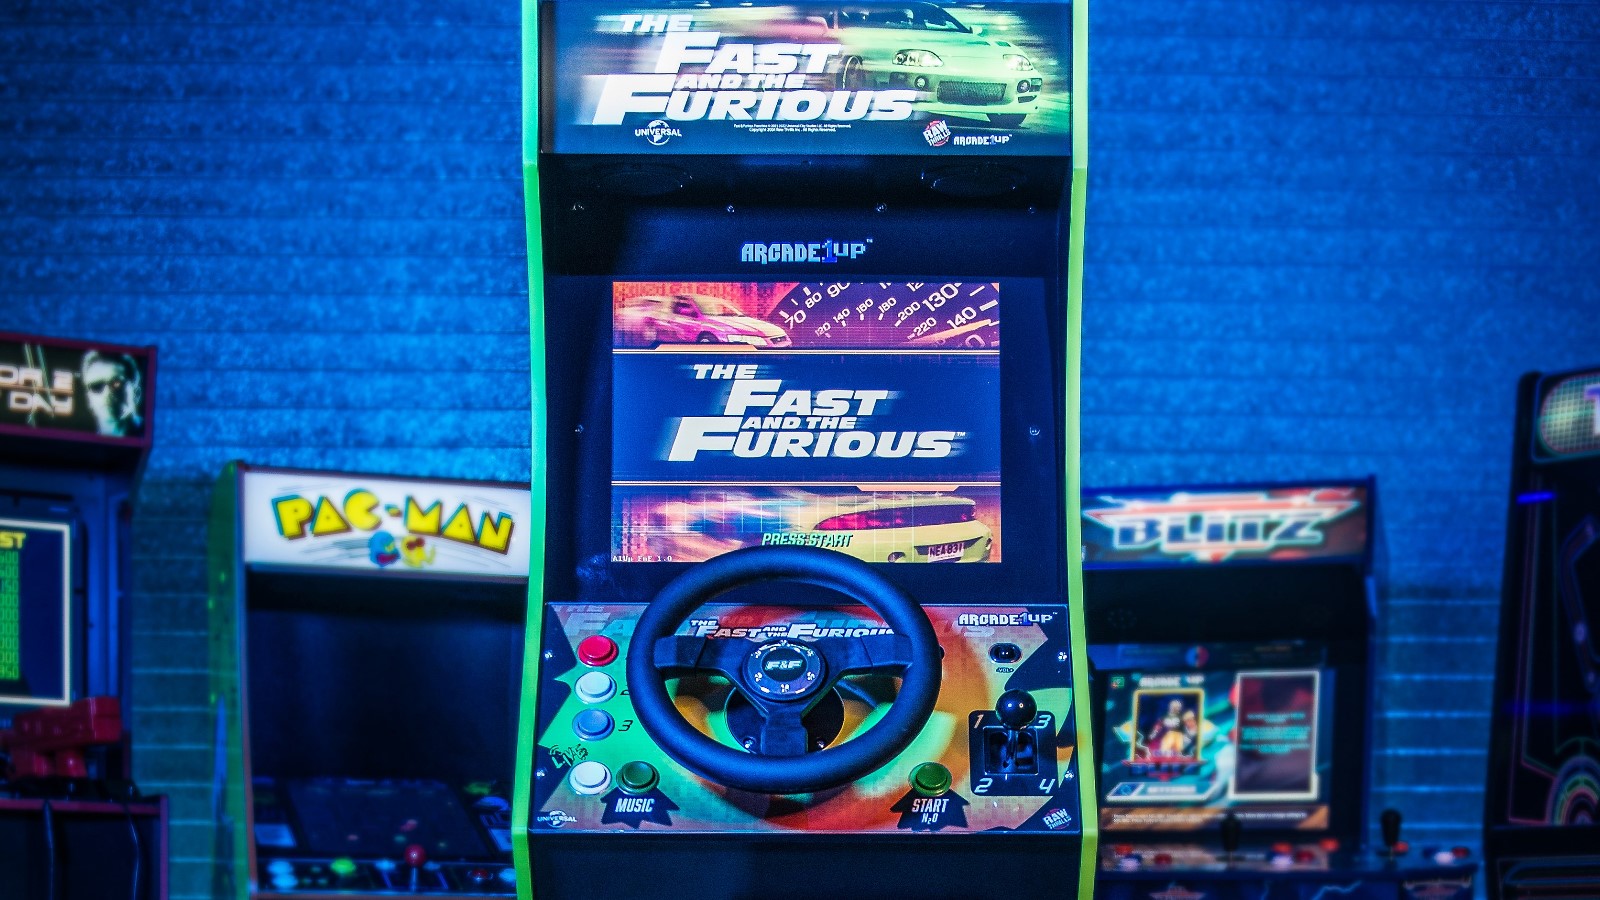 Fast & Furious” Arcade1Up Review